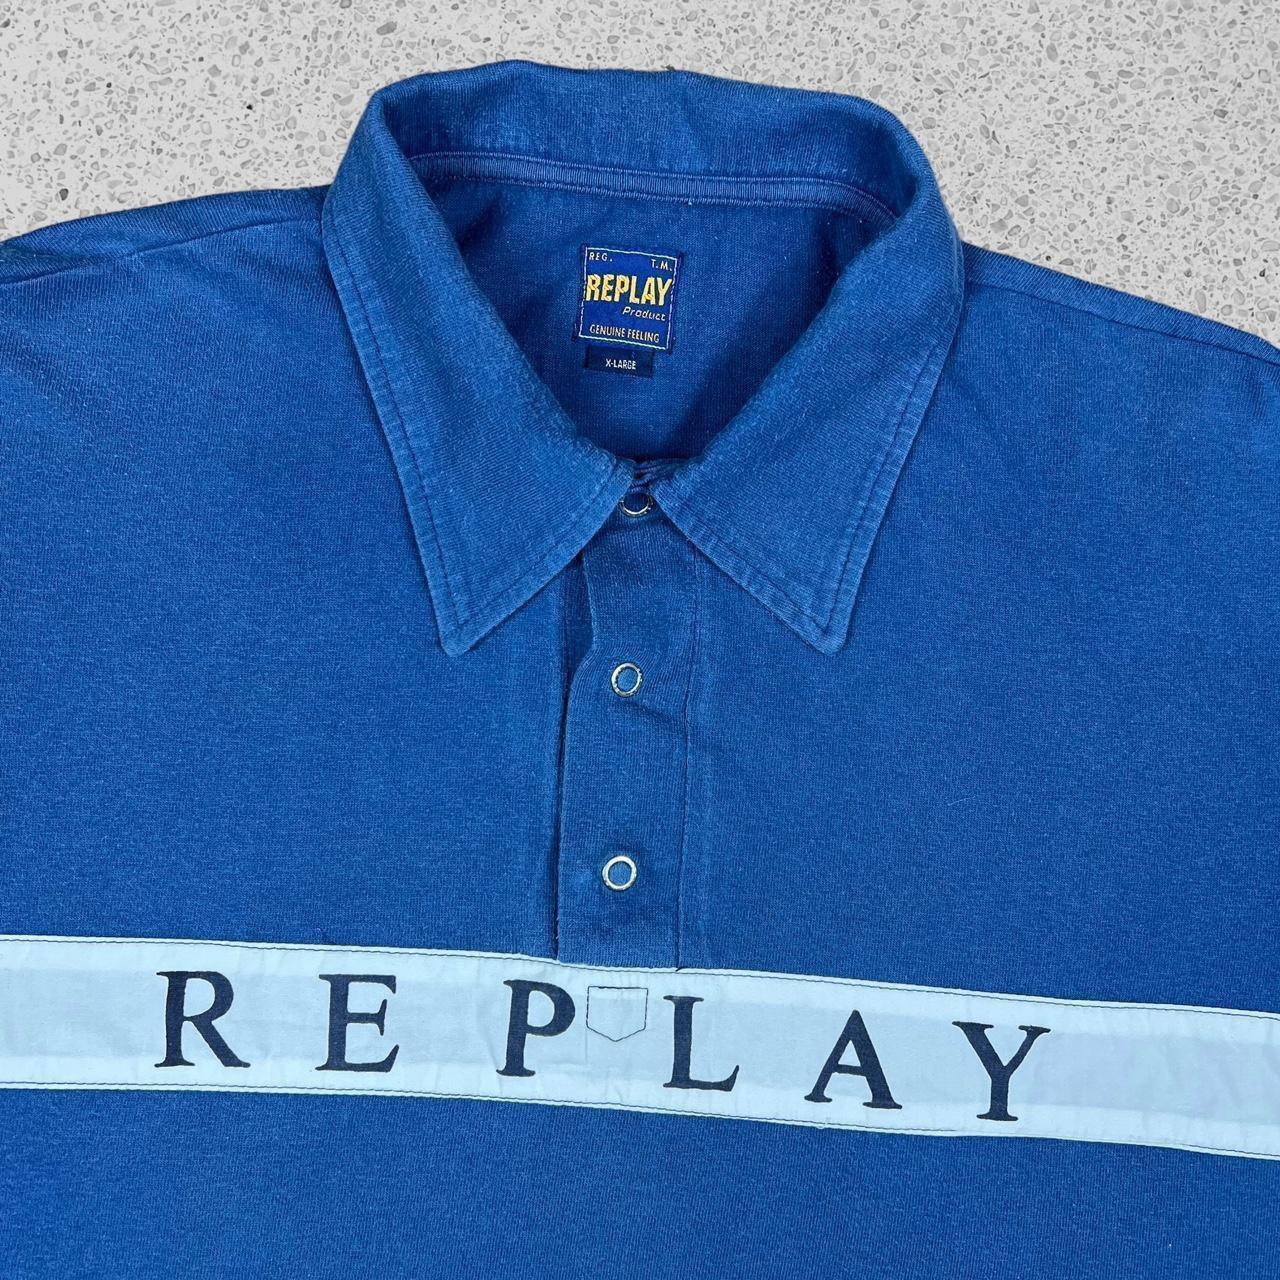 90s vintage Depop shirt - vintage Replay 90s polo blue